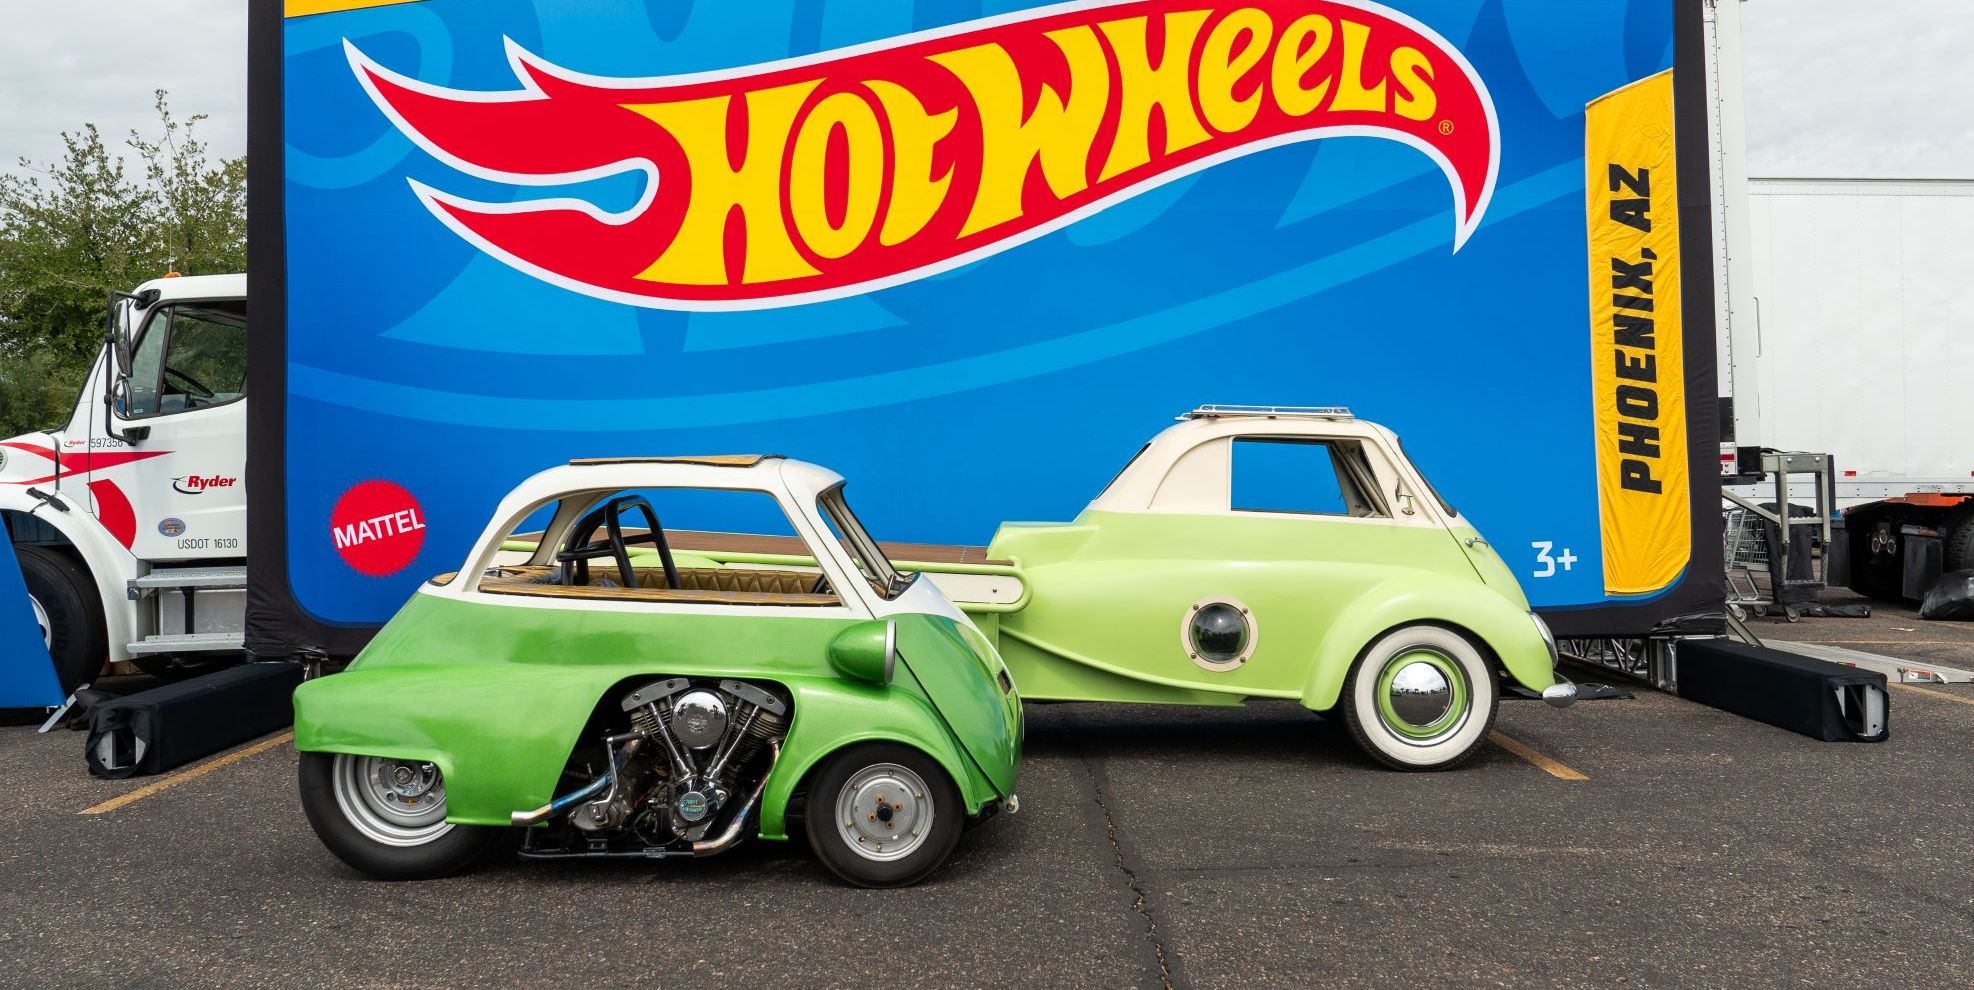 These Harley-Davidson-Powered BMW Isetta Microcars Are Hot Wheels Legends Finalists